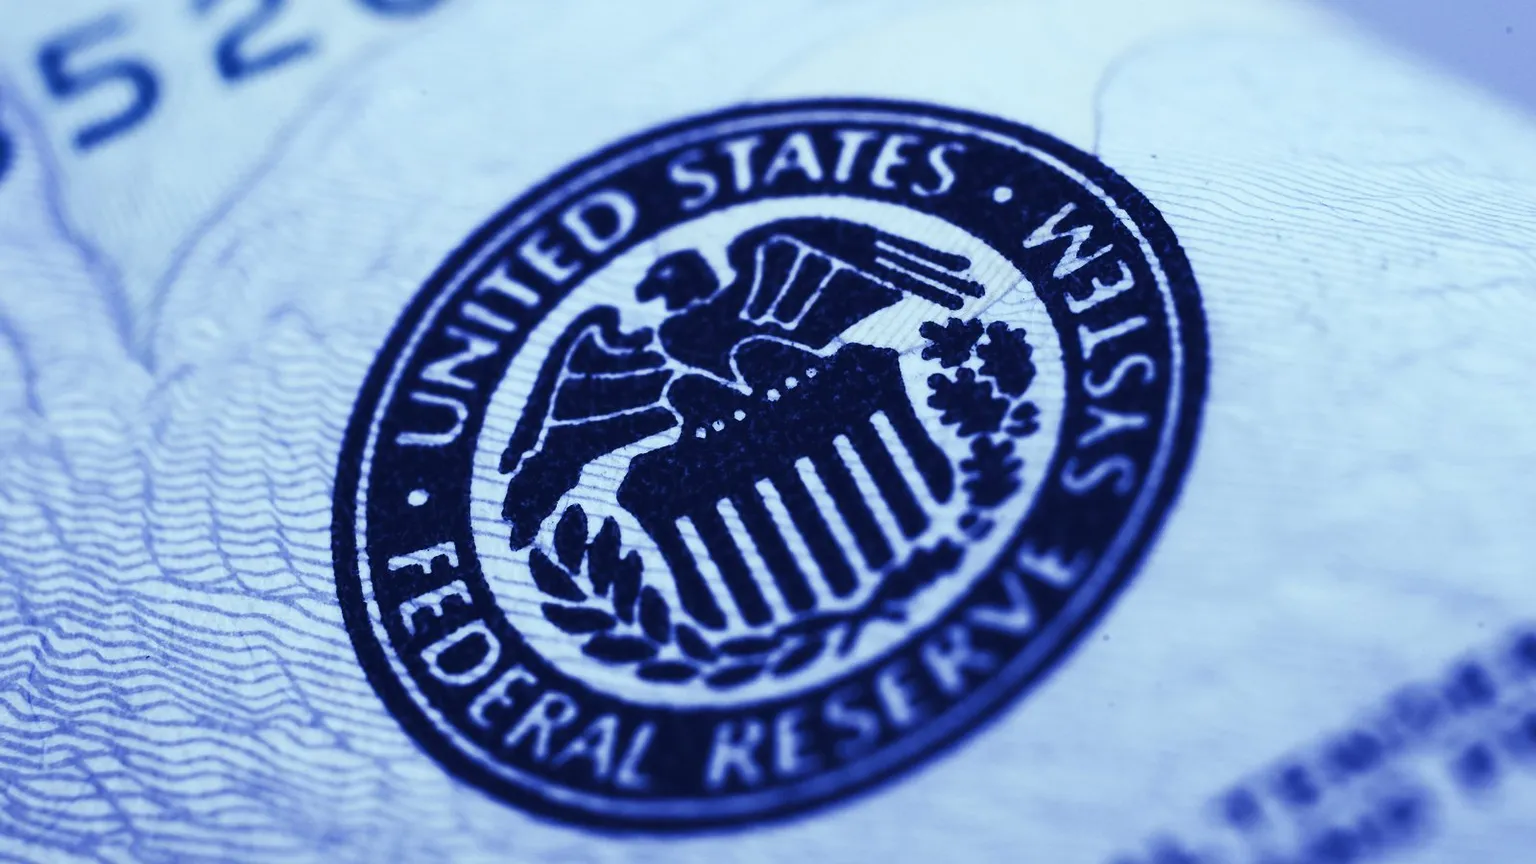 The US Federal Reserve will begin to buy billions of dollars worth of corporate credit. Image: Shutterstock